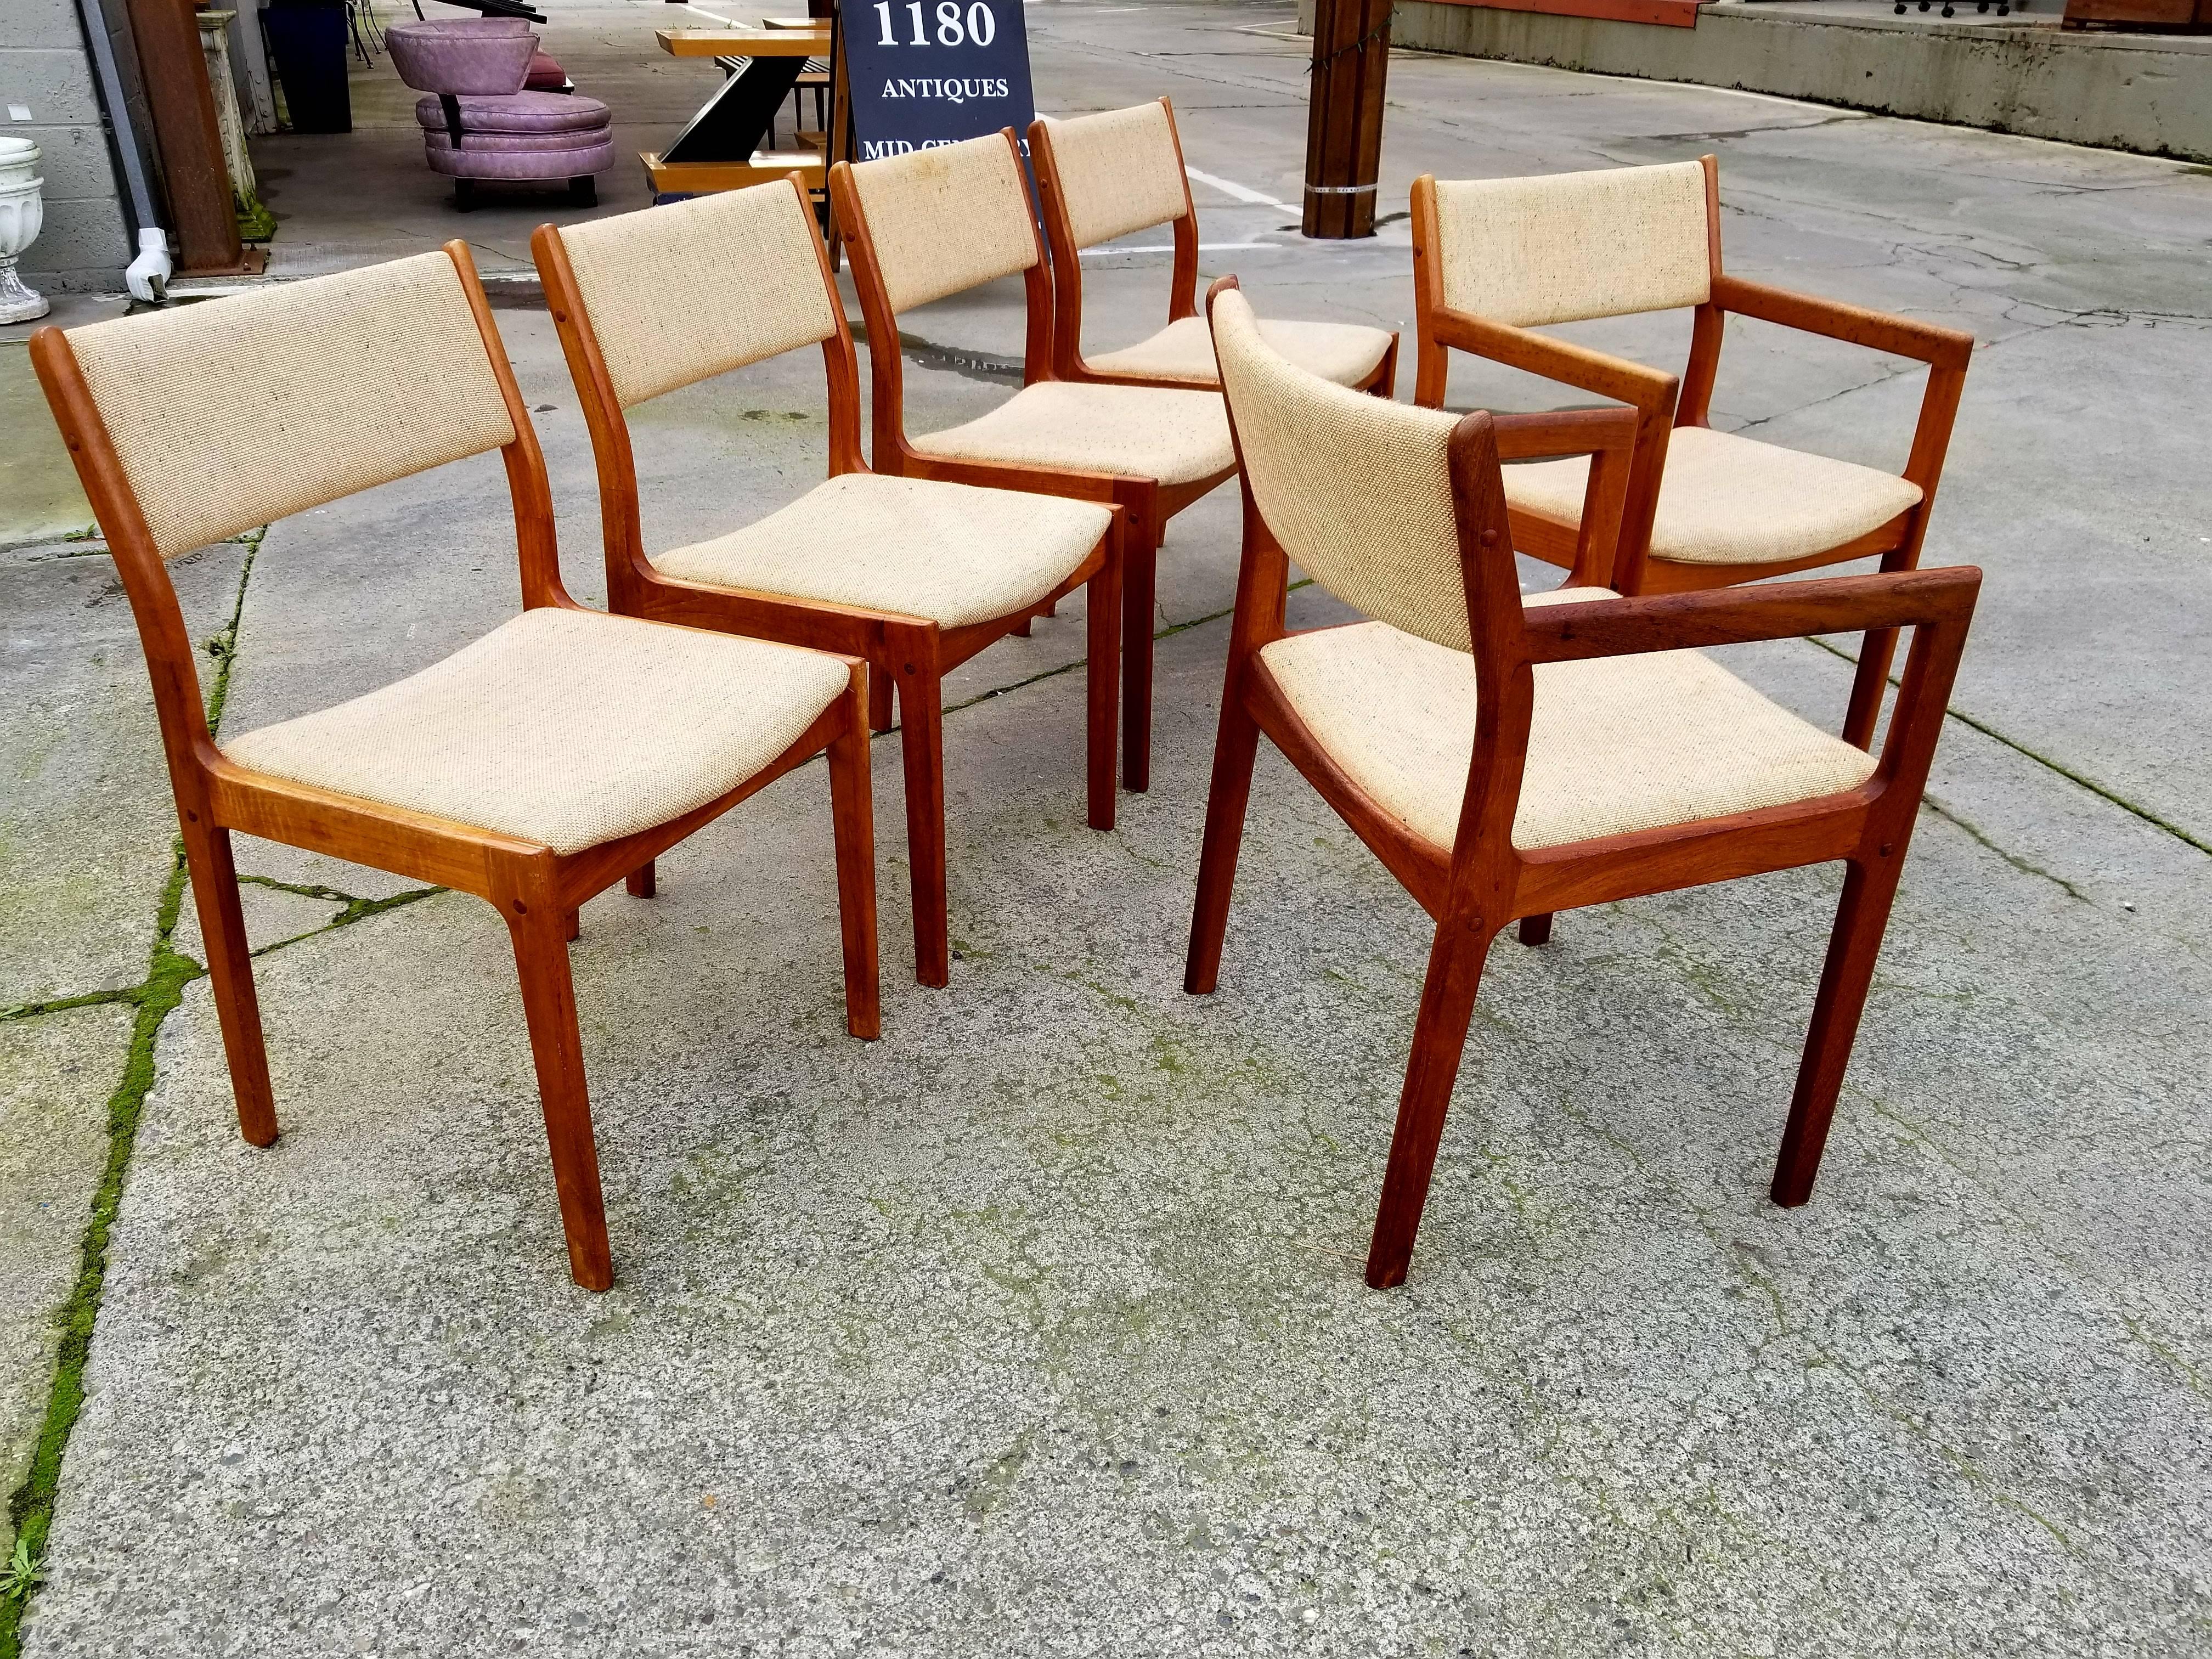 A set of six teak Danish modern style dining chairs by D-Scan, circa 1960s. Solid teak frames, original upholstery. Side chairs measure 18.5 W, 18.5